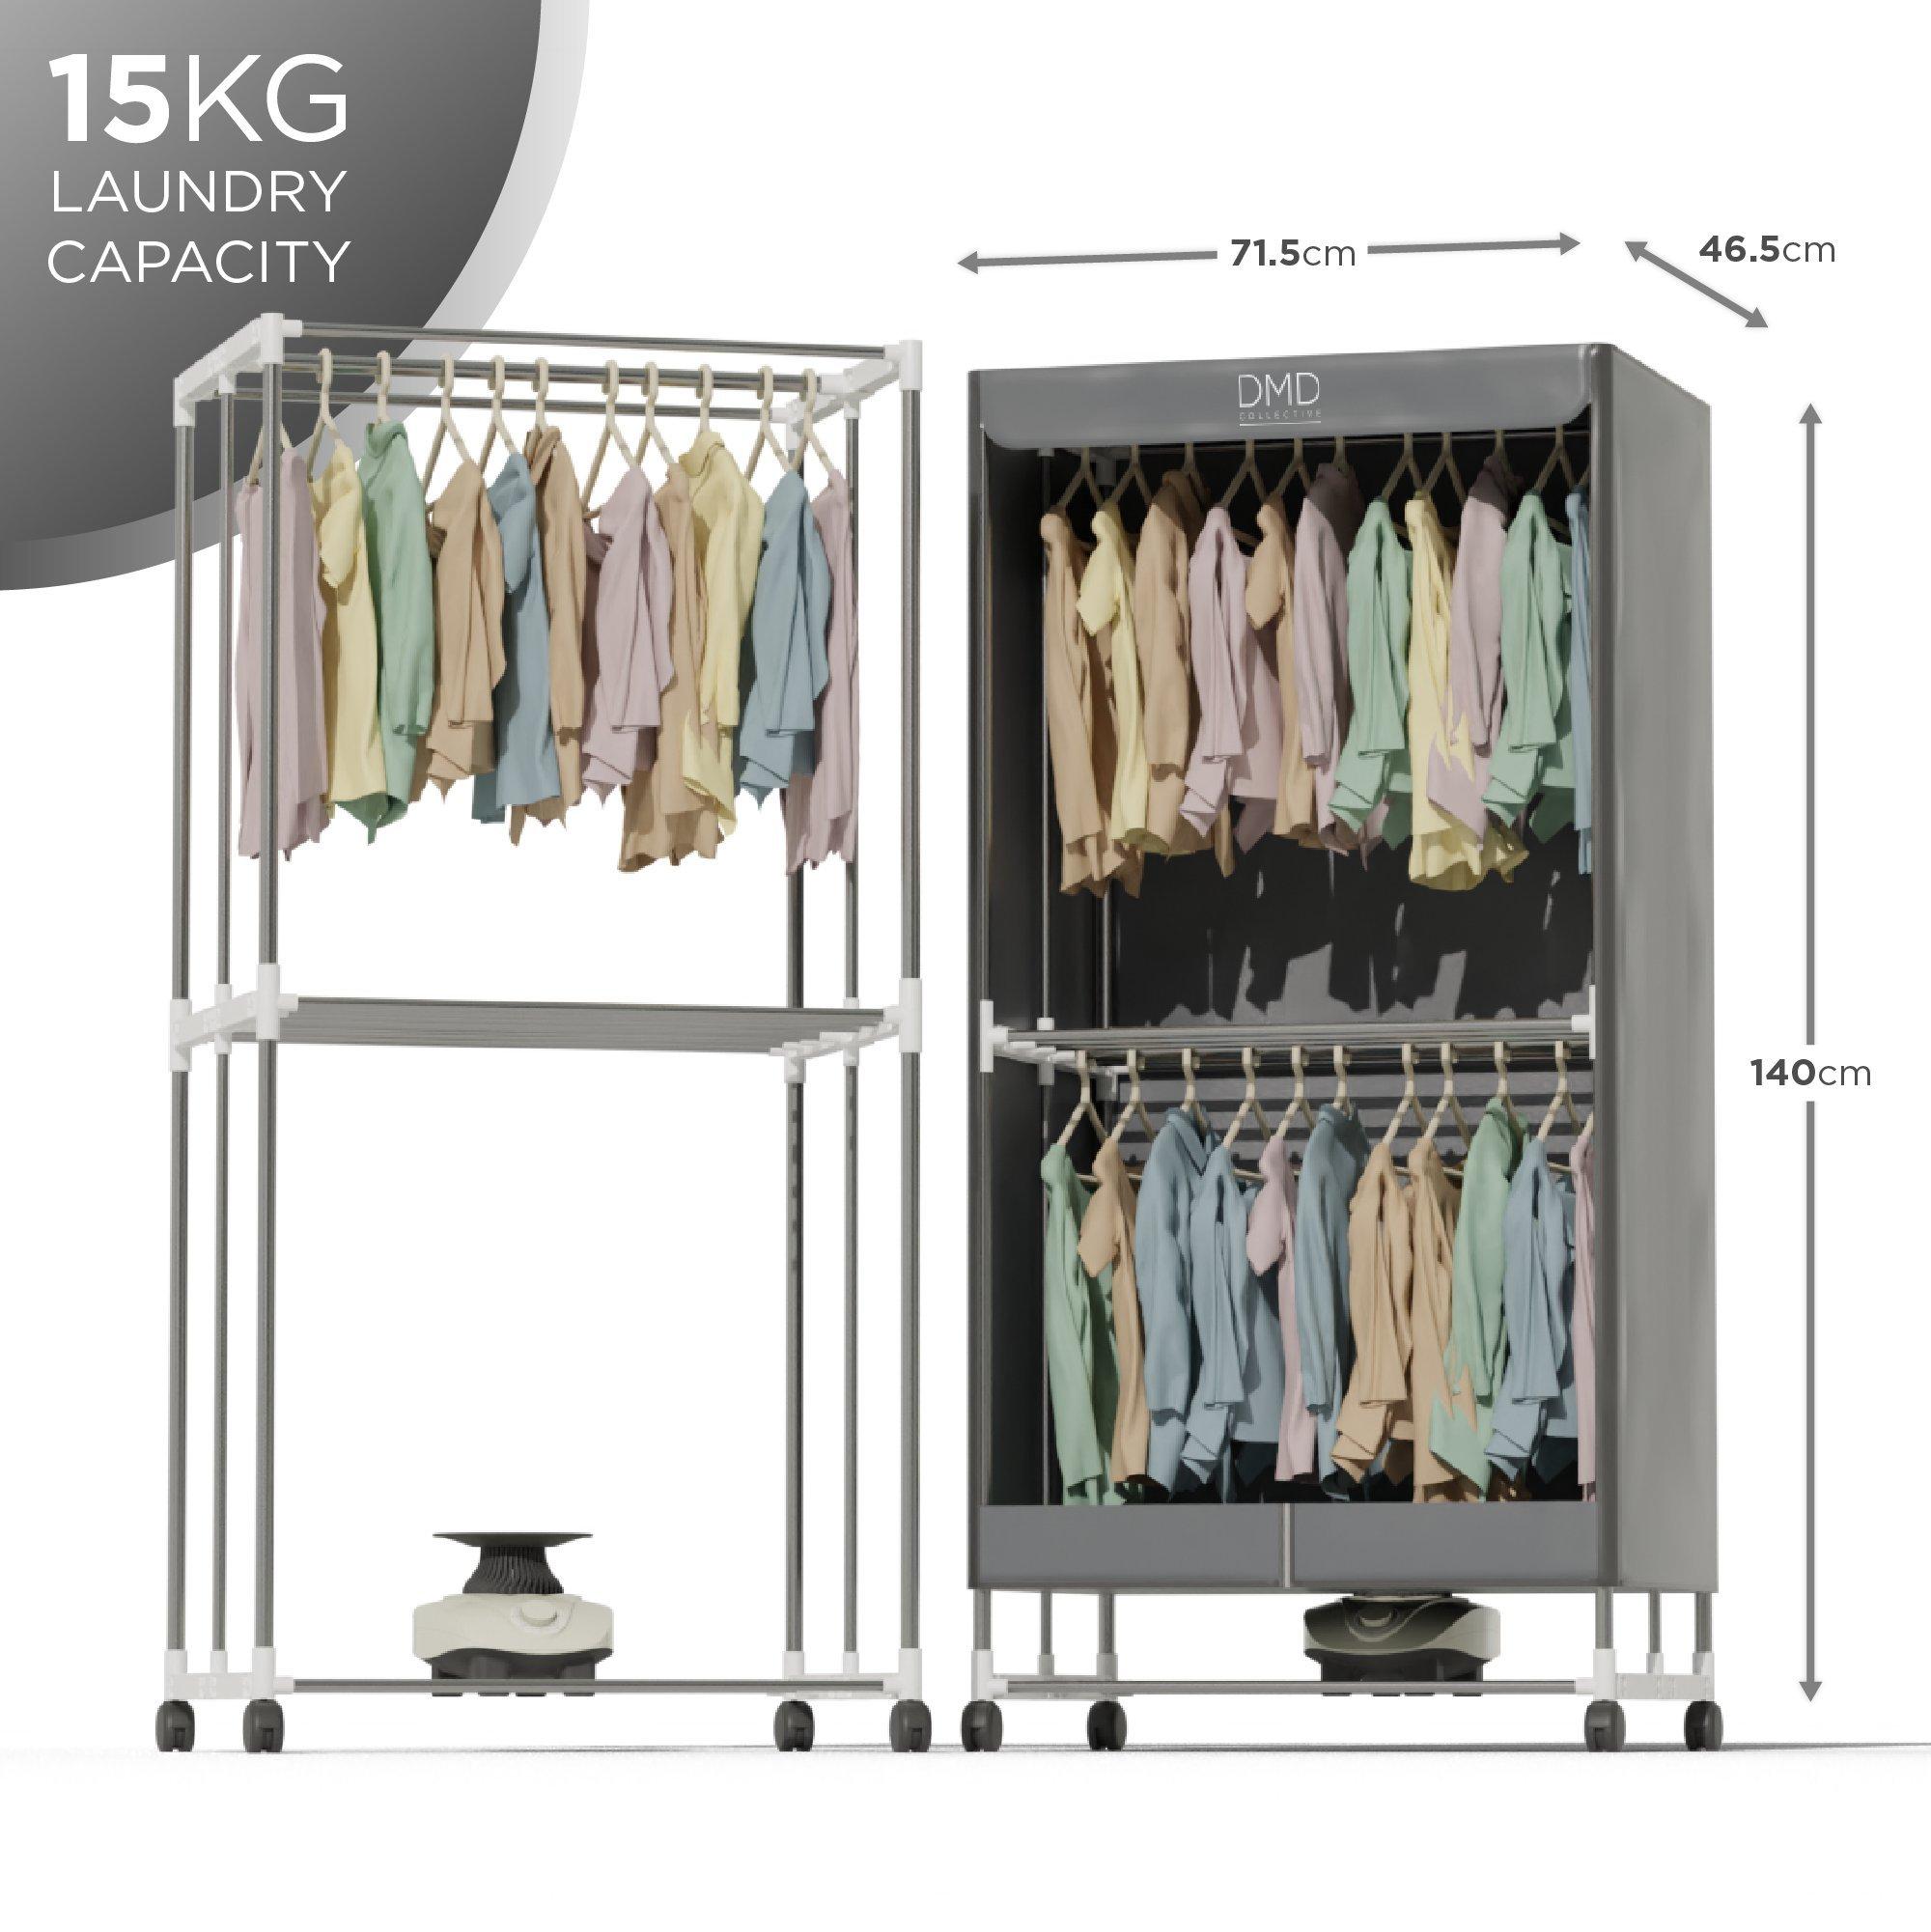 Hang'n'Dry Electric Clothes Airer Dryer 2 Tier Clothes Wardrobe DMDED1